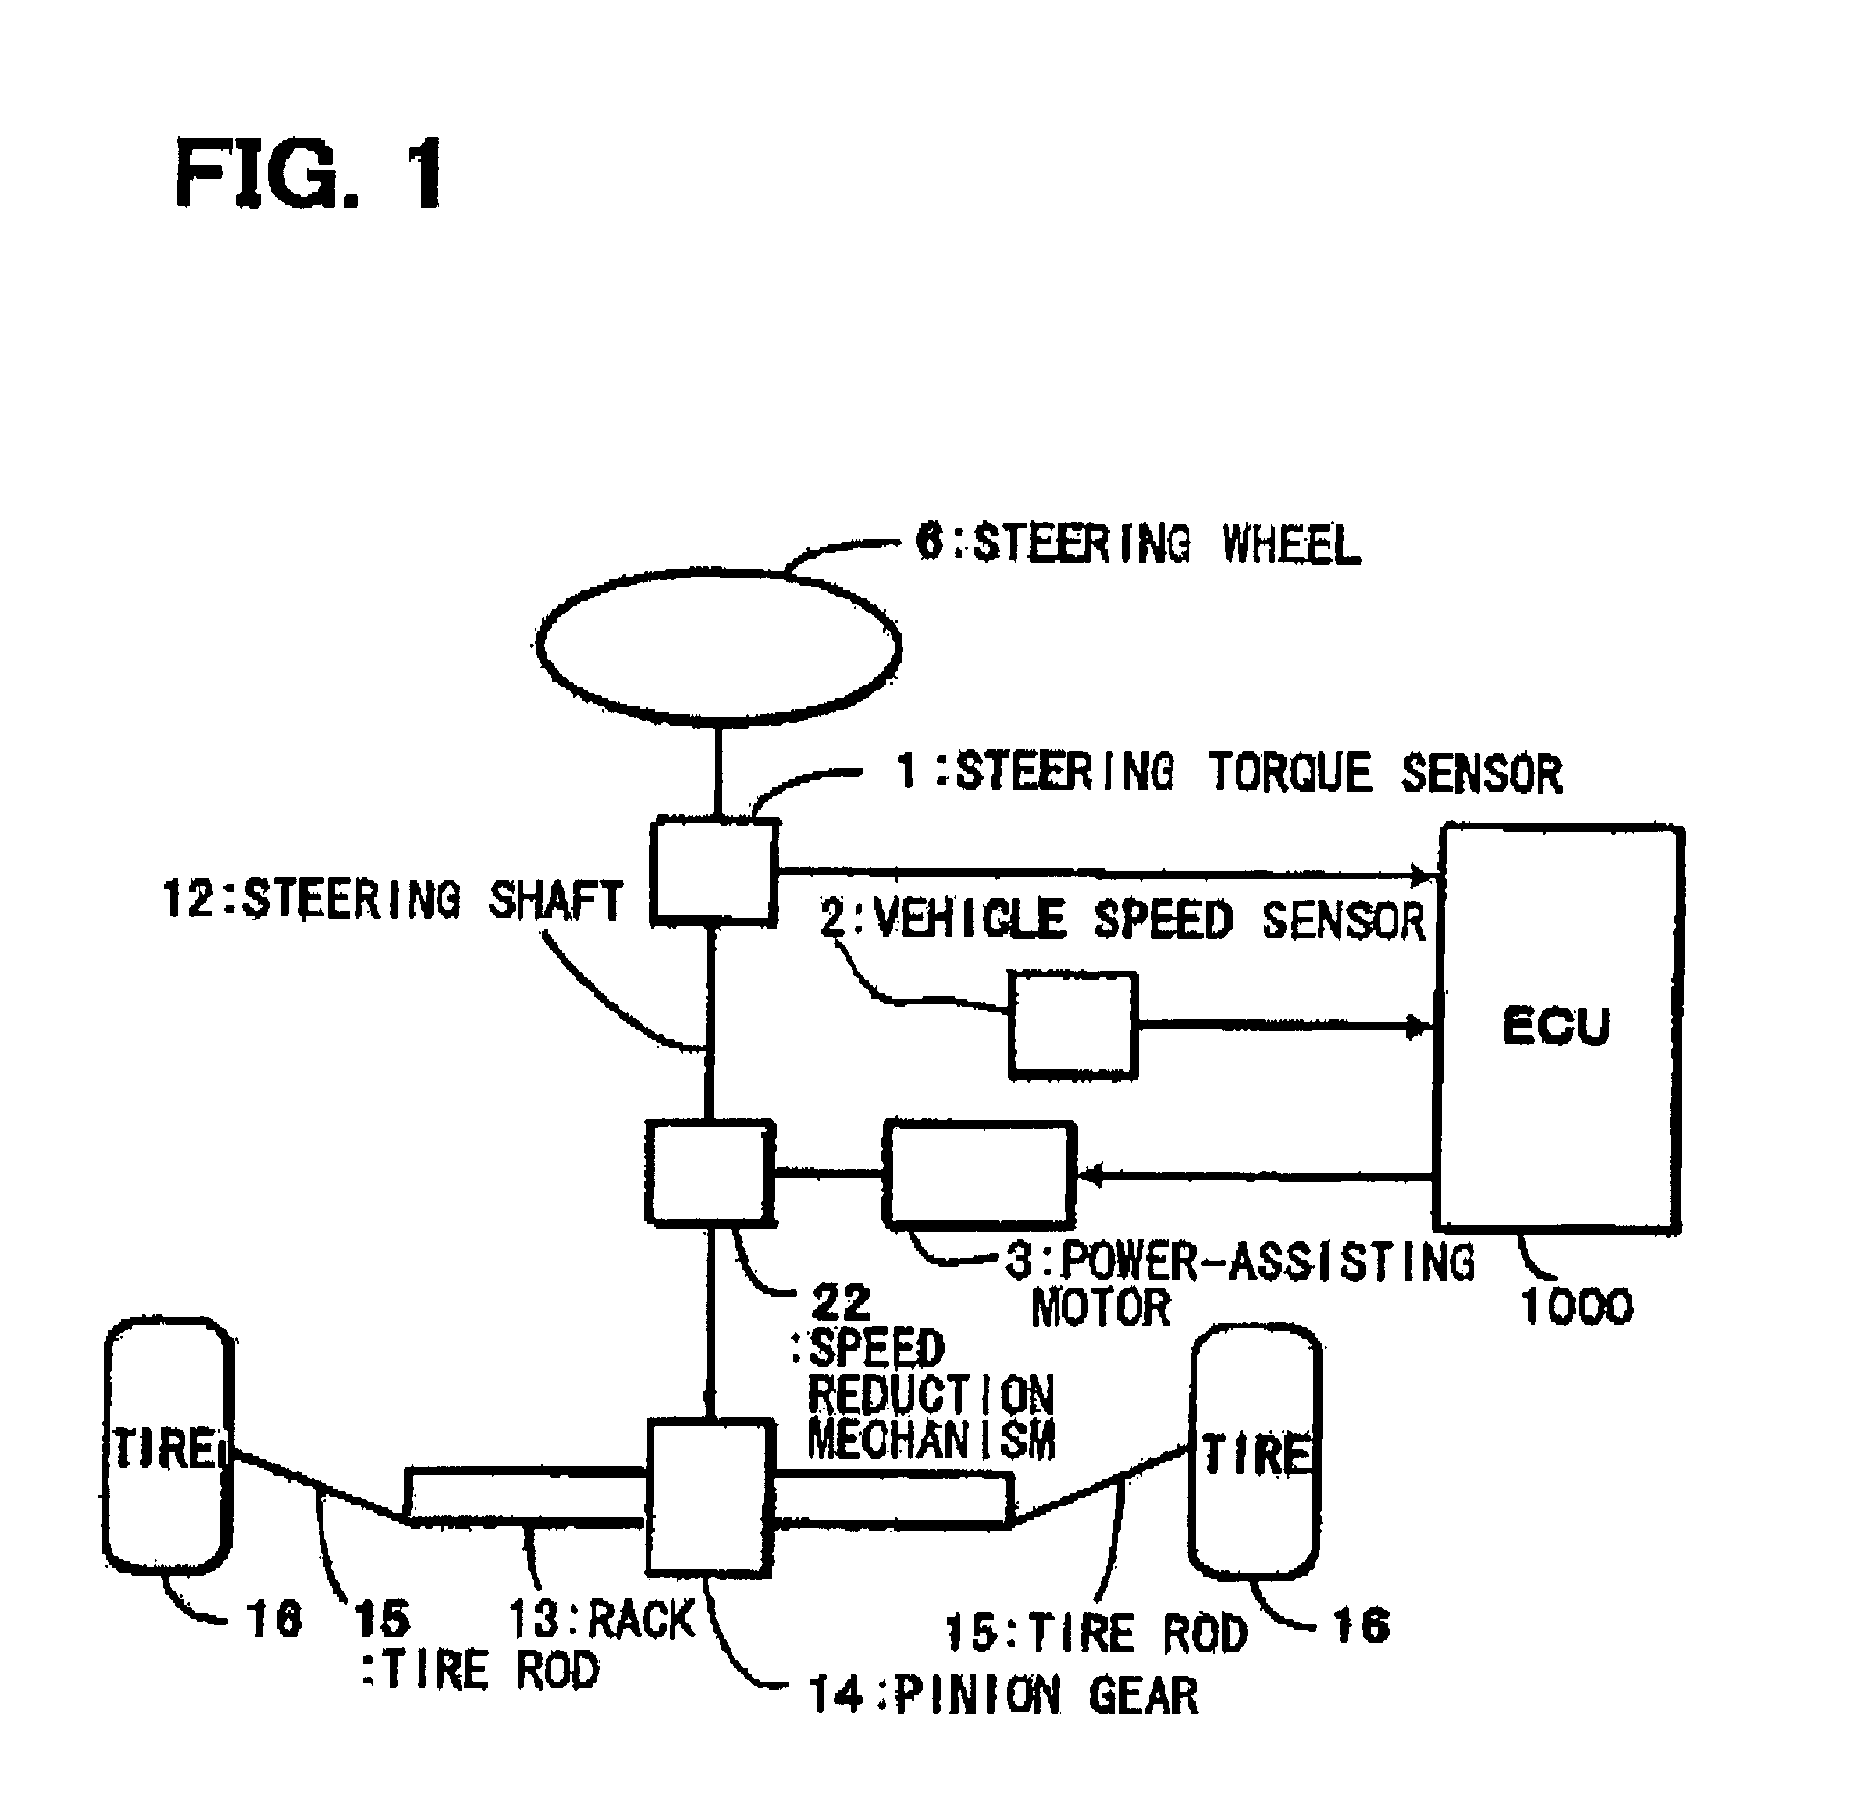 Switching device for controlling large amount of current